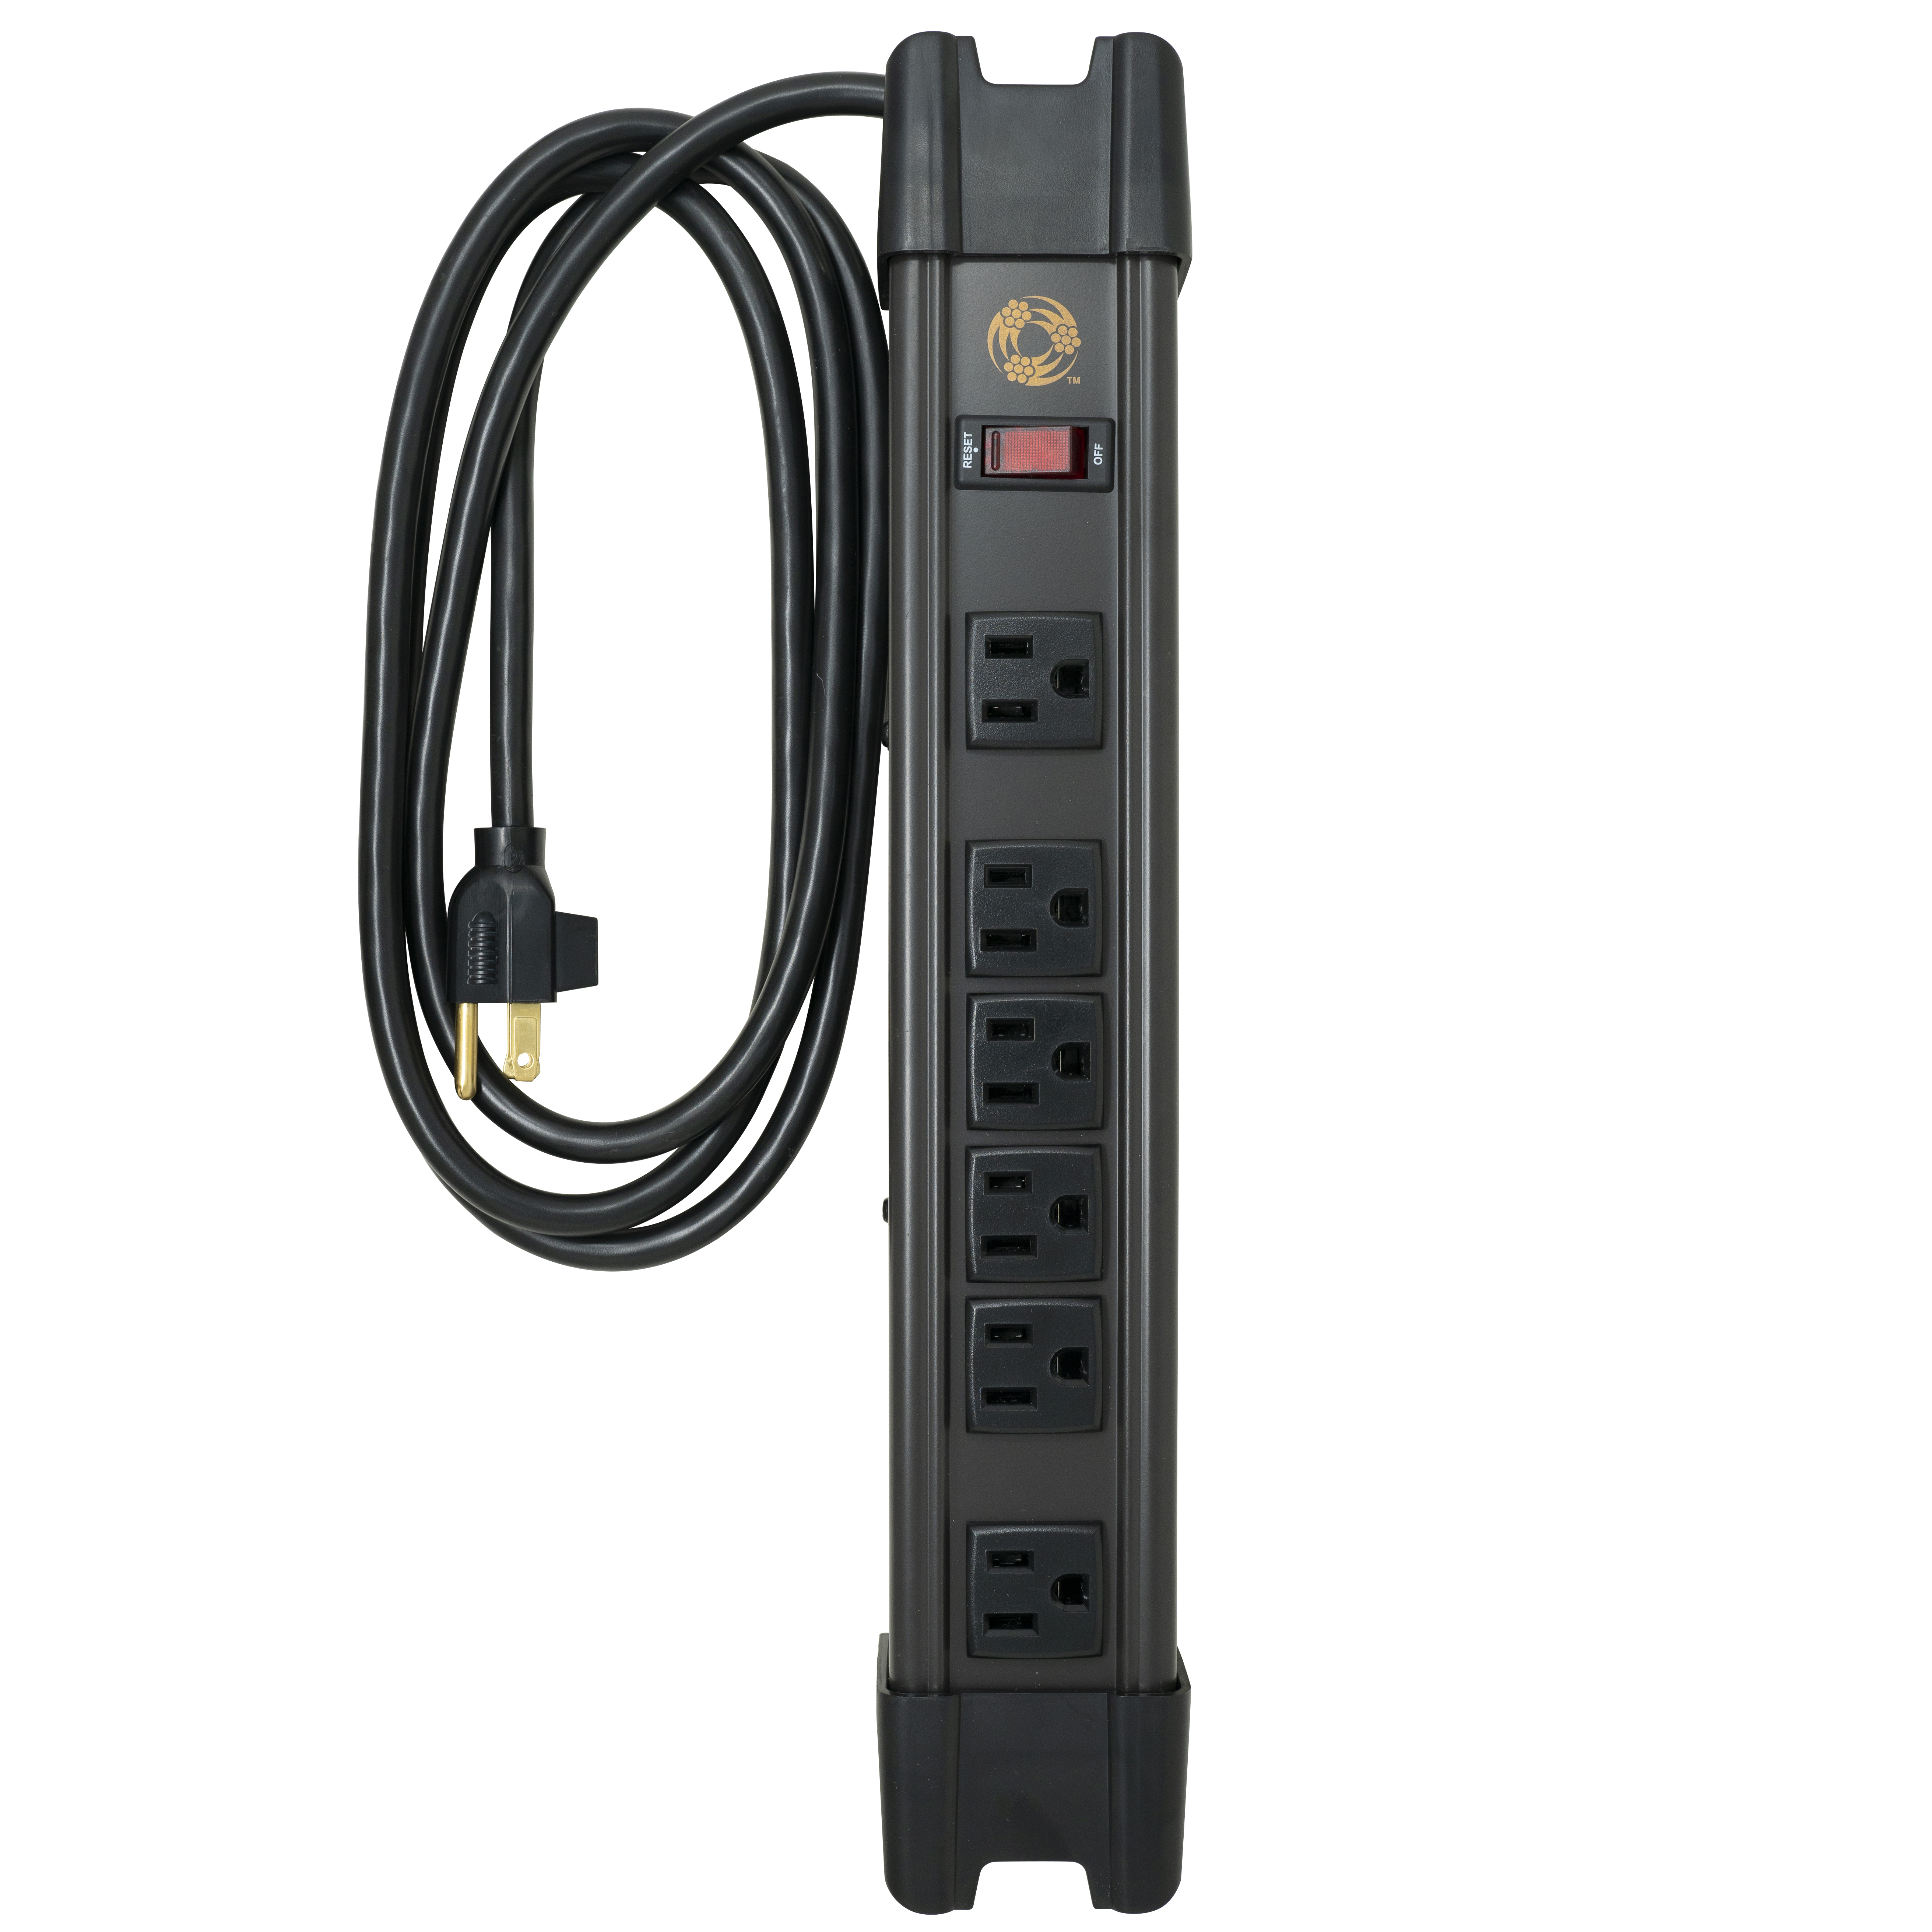 6 Outlet Magnetic Power Strip